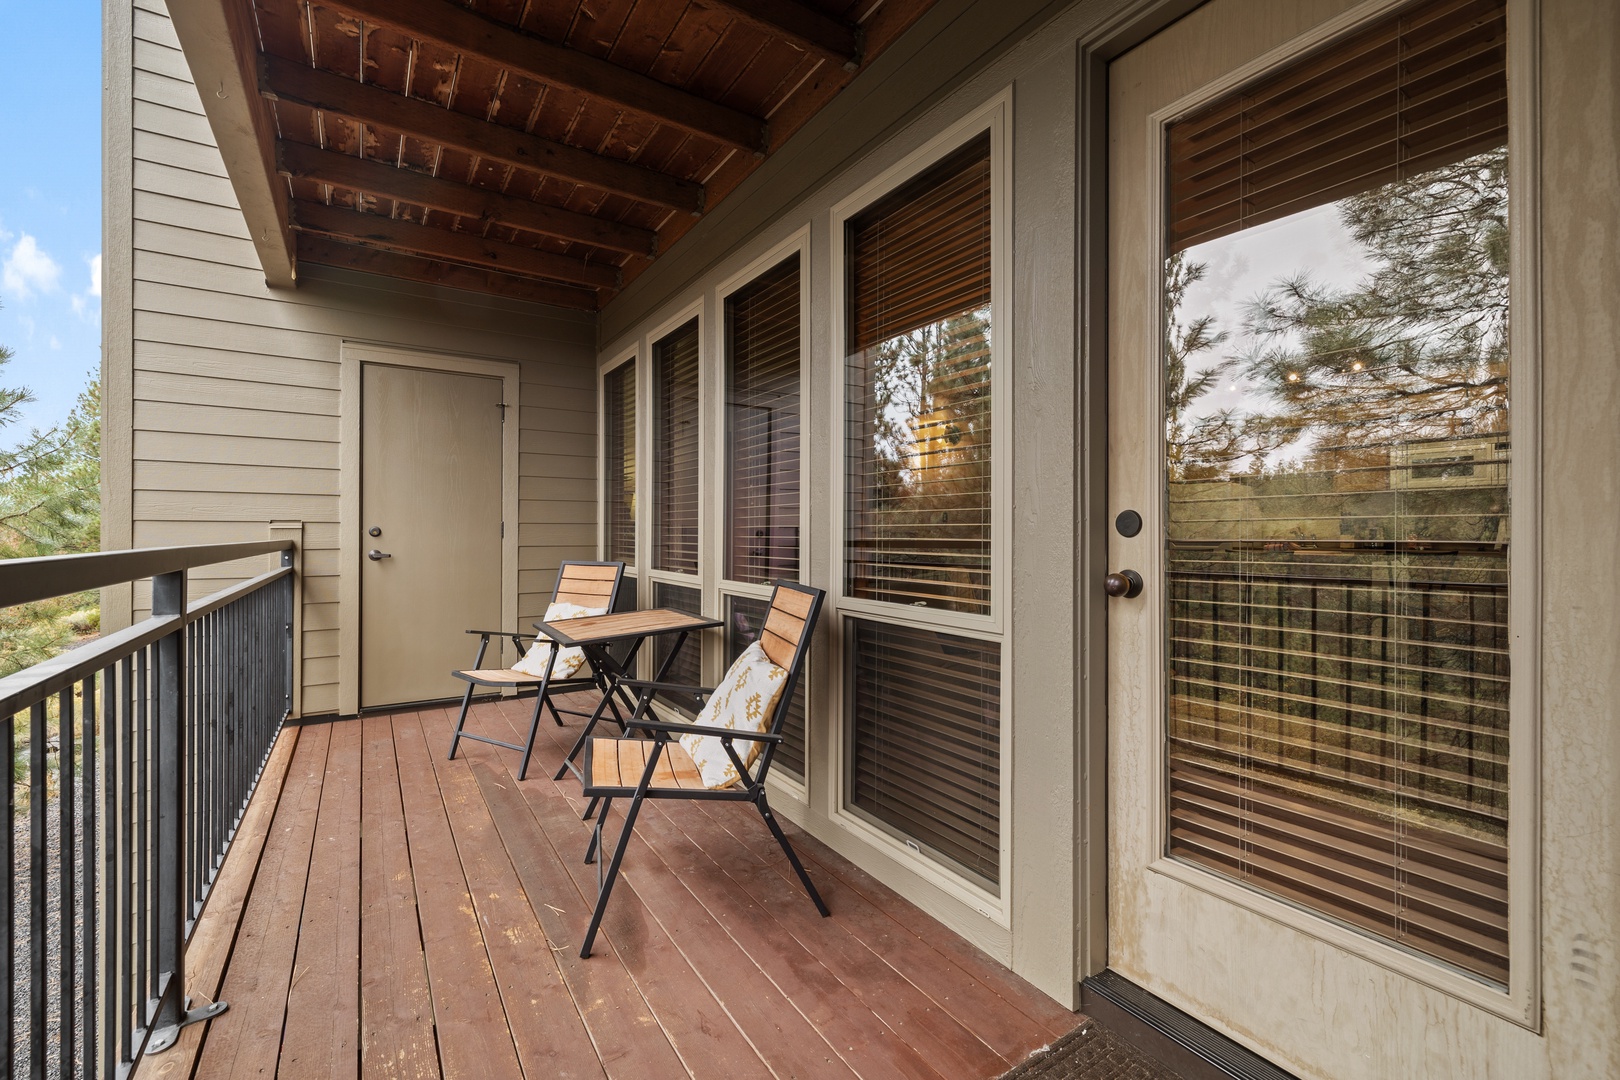 Lounge the day away & enjoy the view on the tranquil back deck